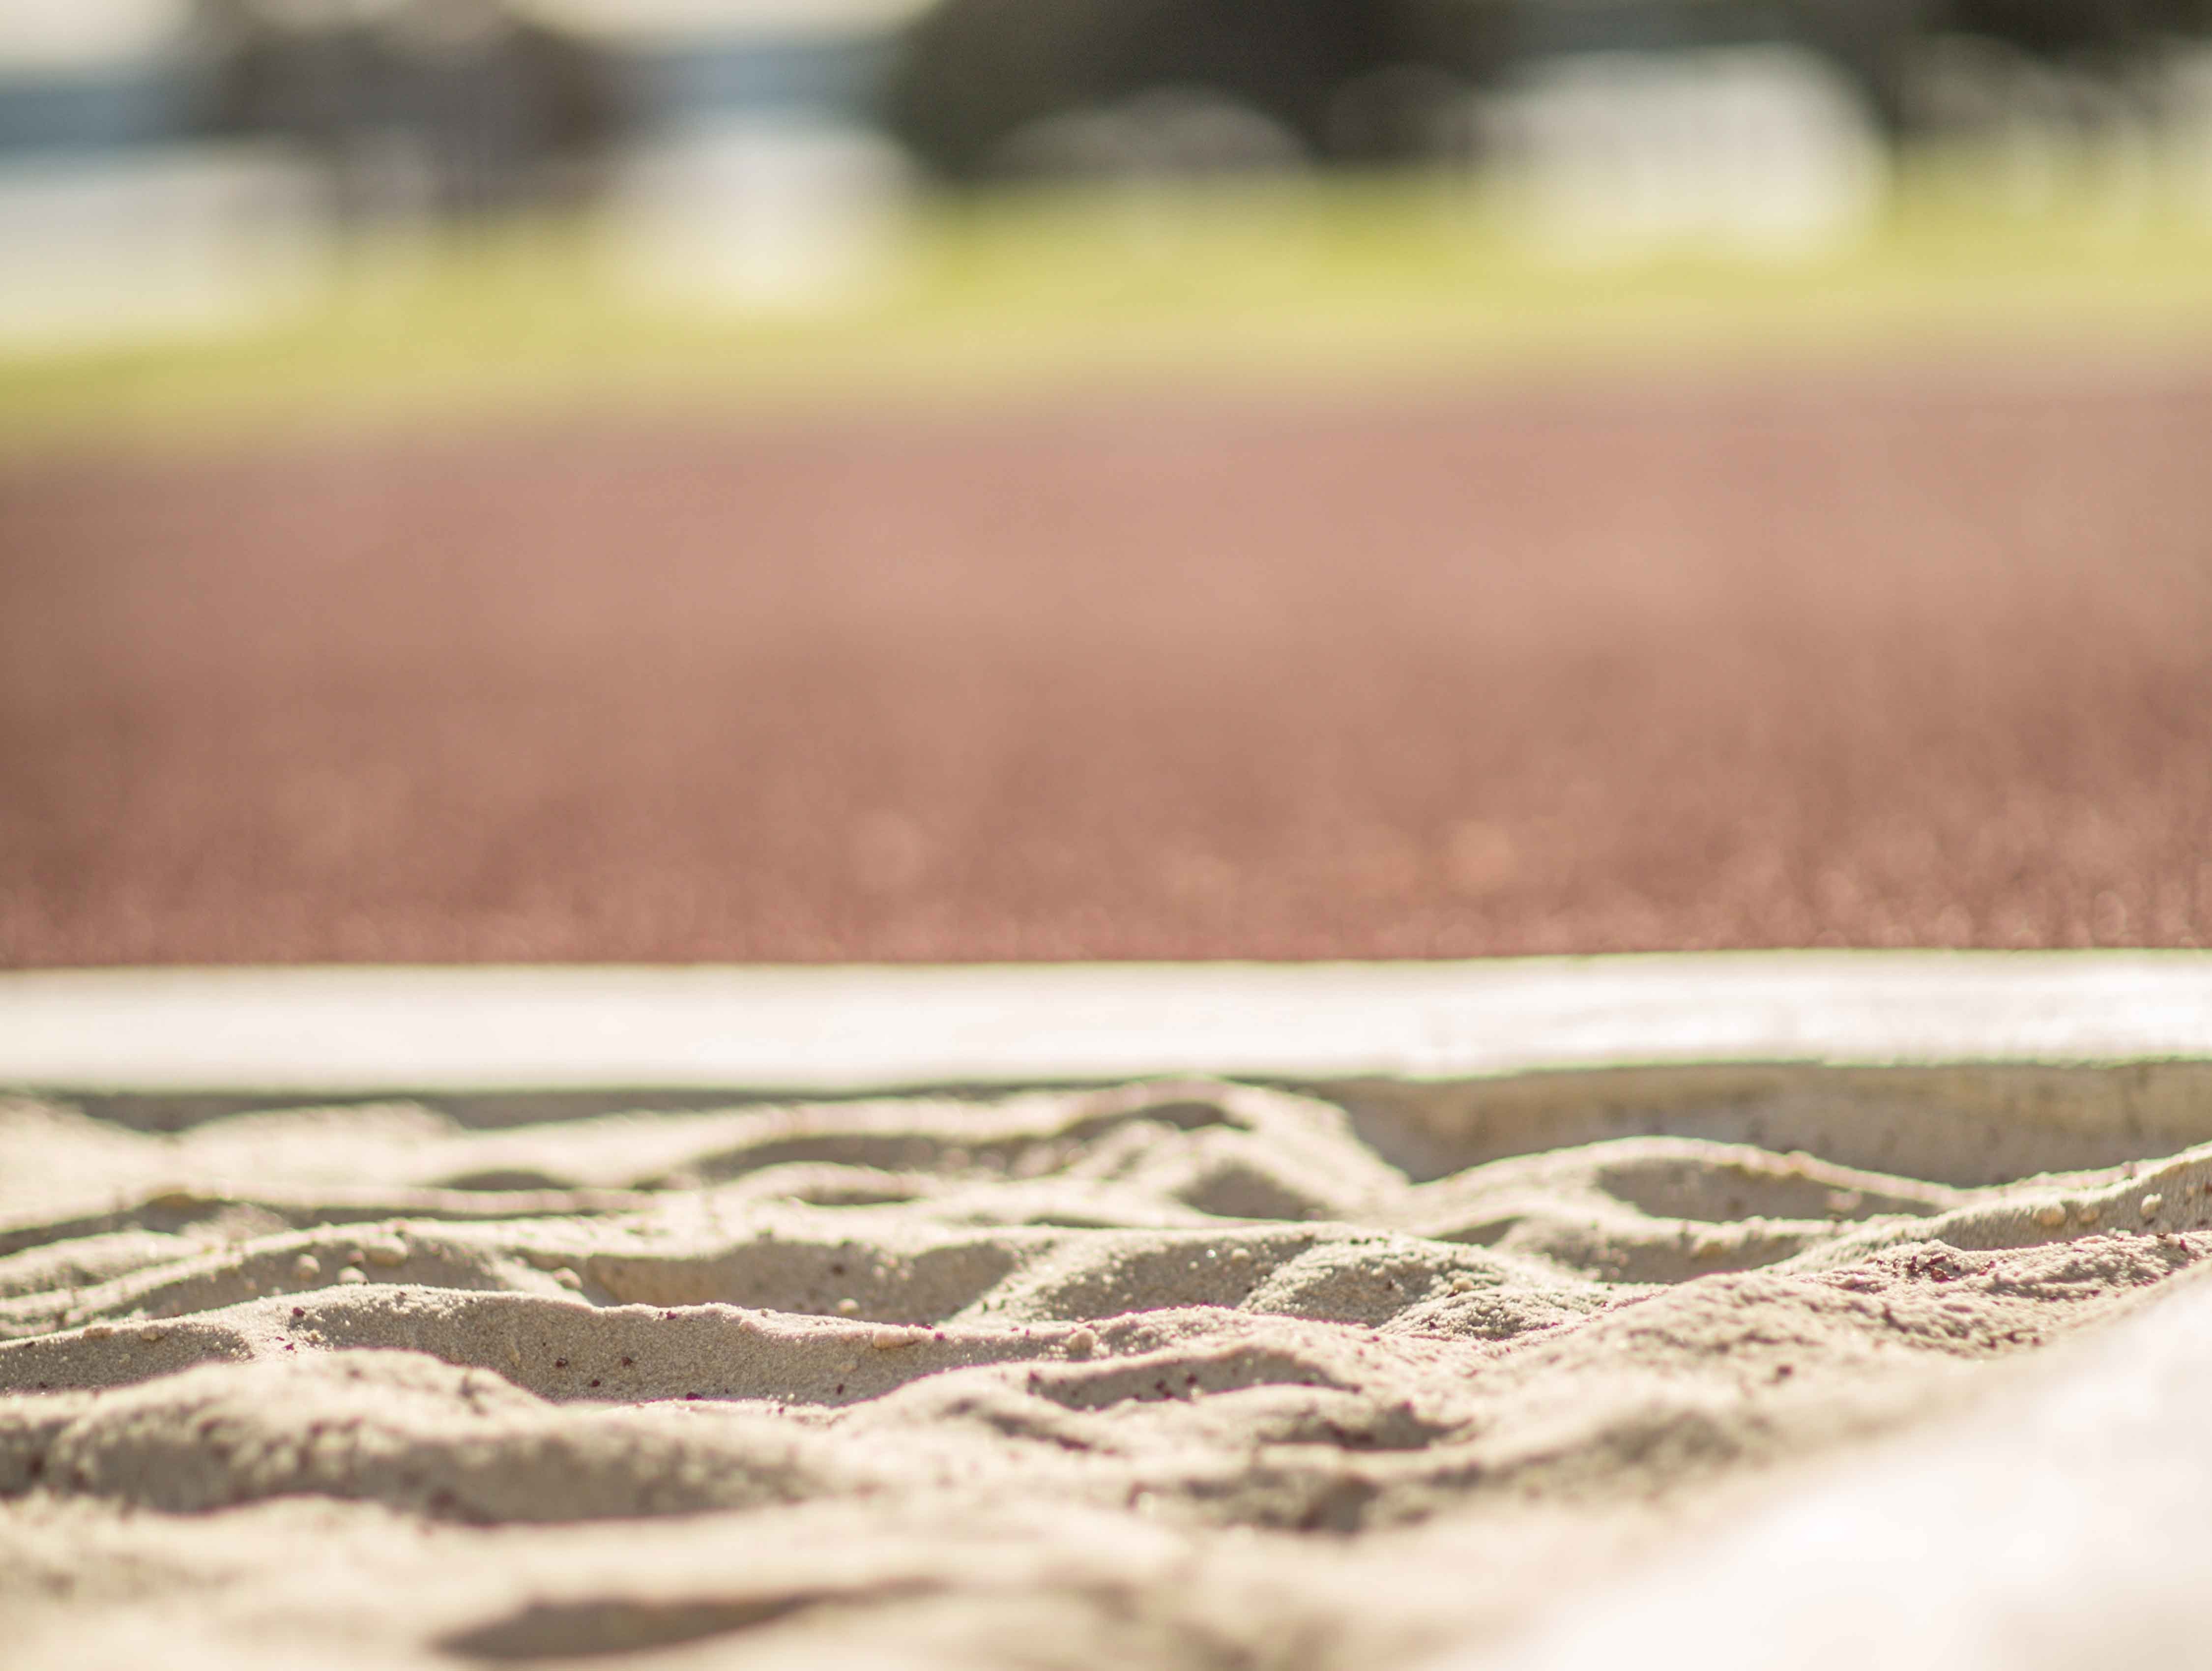 Close up of a sand pool next to an outdoor athletic running track